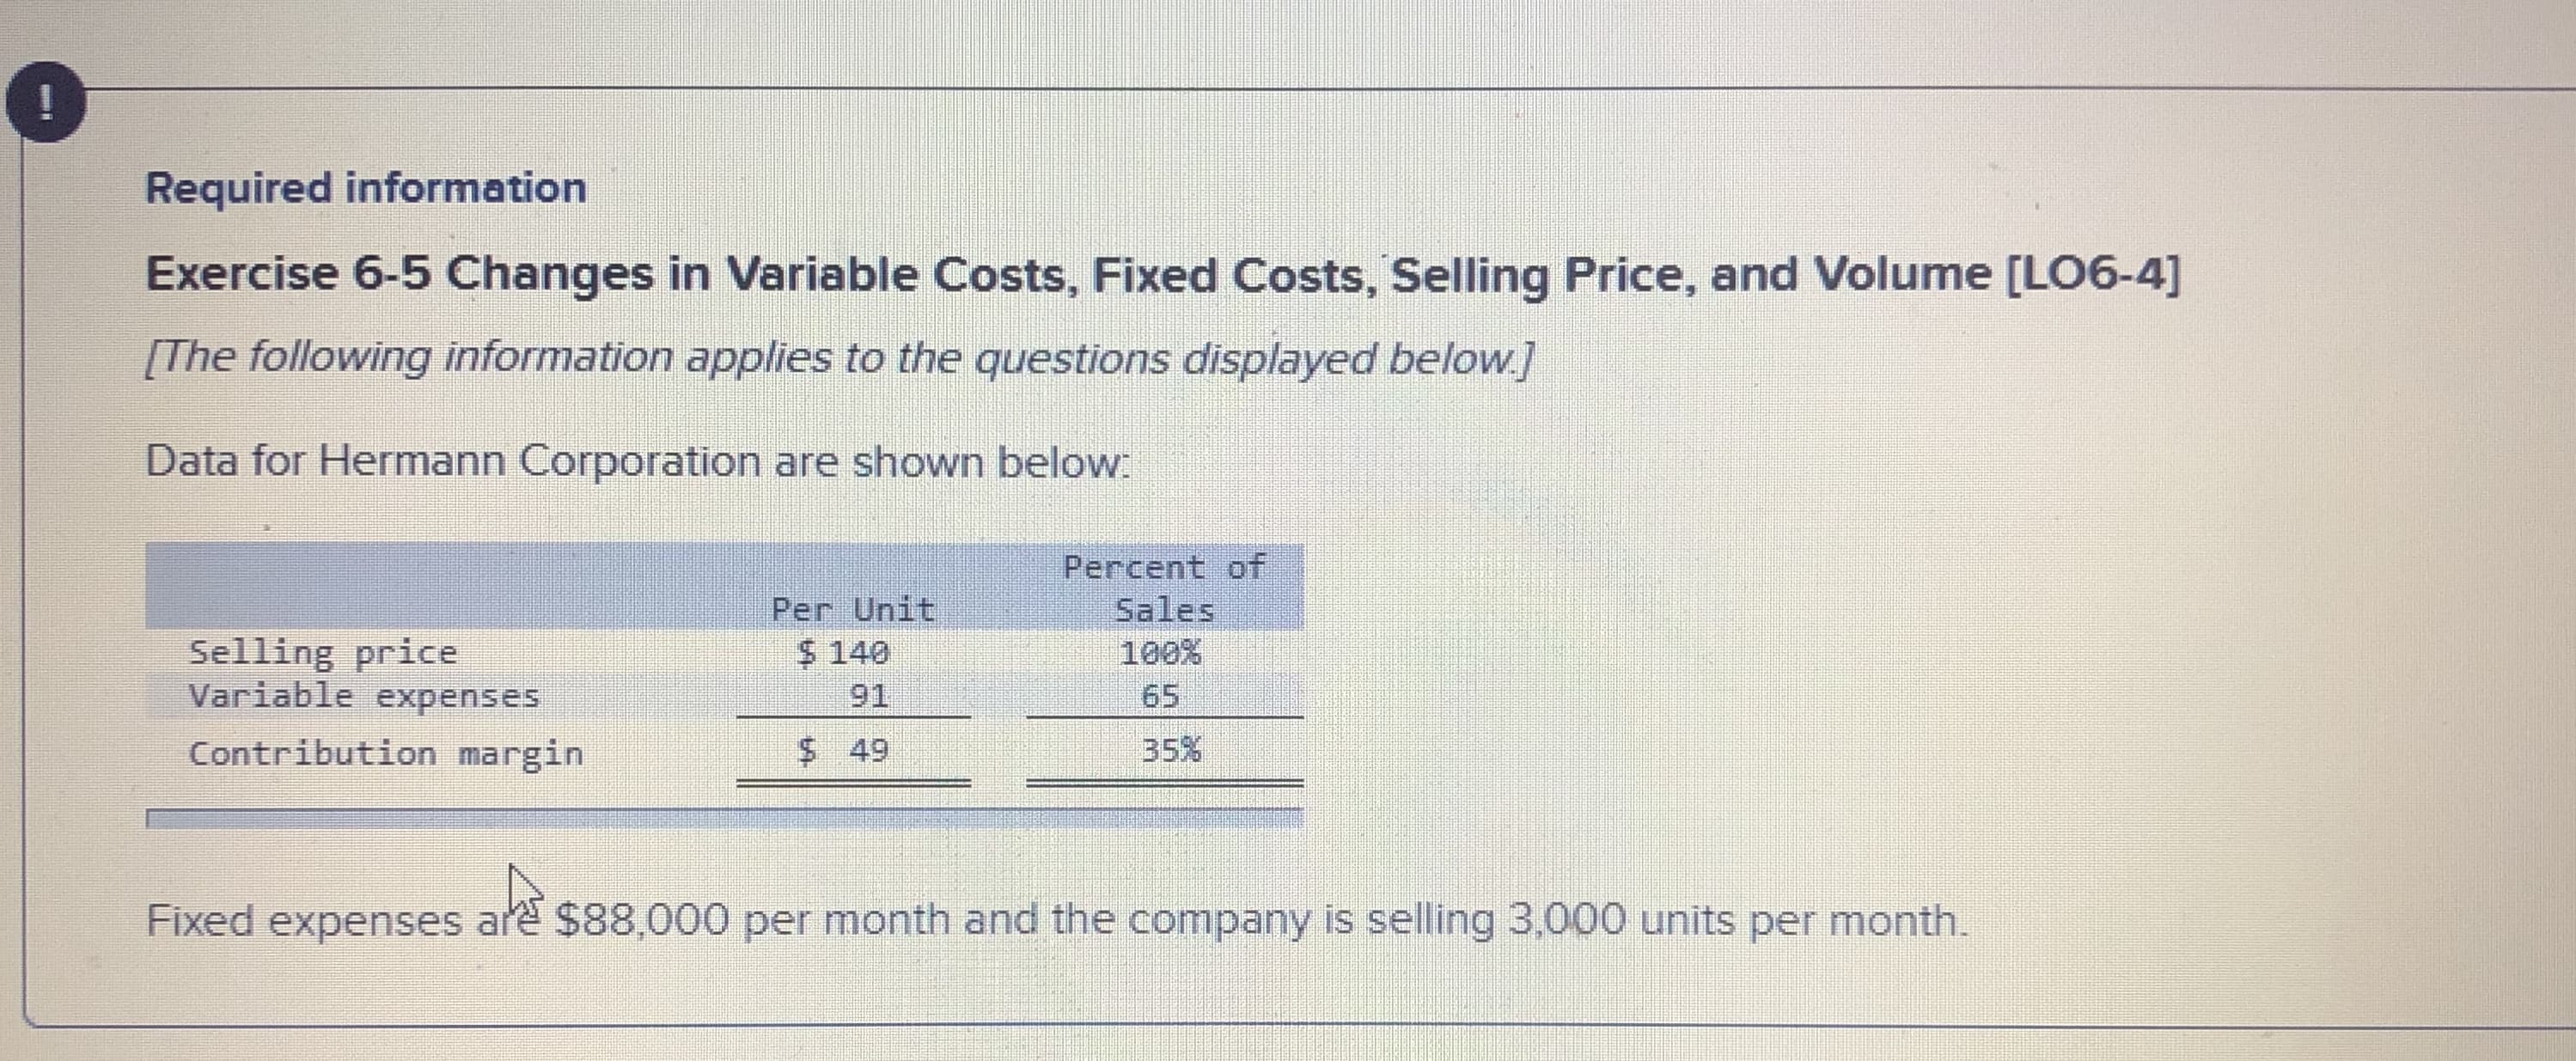 Required information
Exercise 6-5 Changes in Variable Costs, Fixed Costs, Selling Price, and Volume [LO6-4]
[The following information applies to the questions displayed below.]
Data for Hermann Corporation are shown below
Per Unit
$ 140
Percent of
Sales
100%
Selling price
Variable expenses
91
65
Contribution margin
$ 49
35%
Fixed expenses are $88,000 per month and the company is selling 3,000 units per month.
